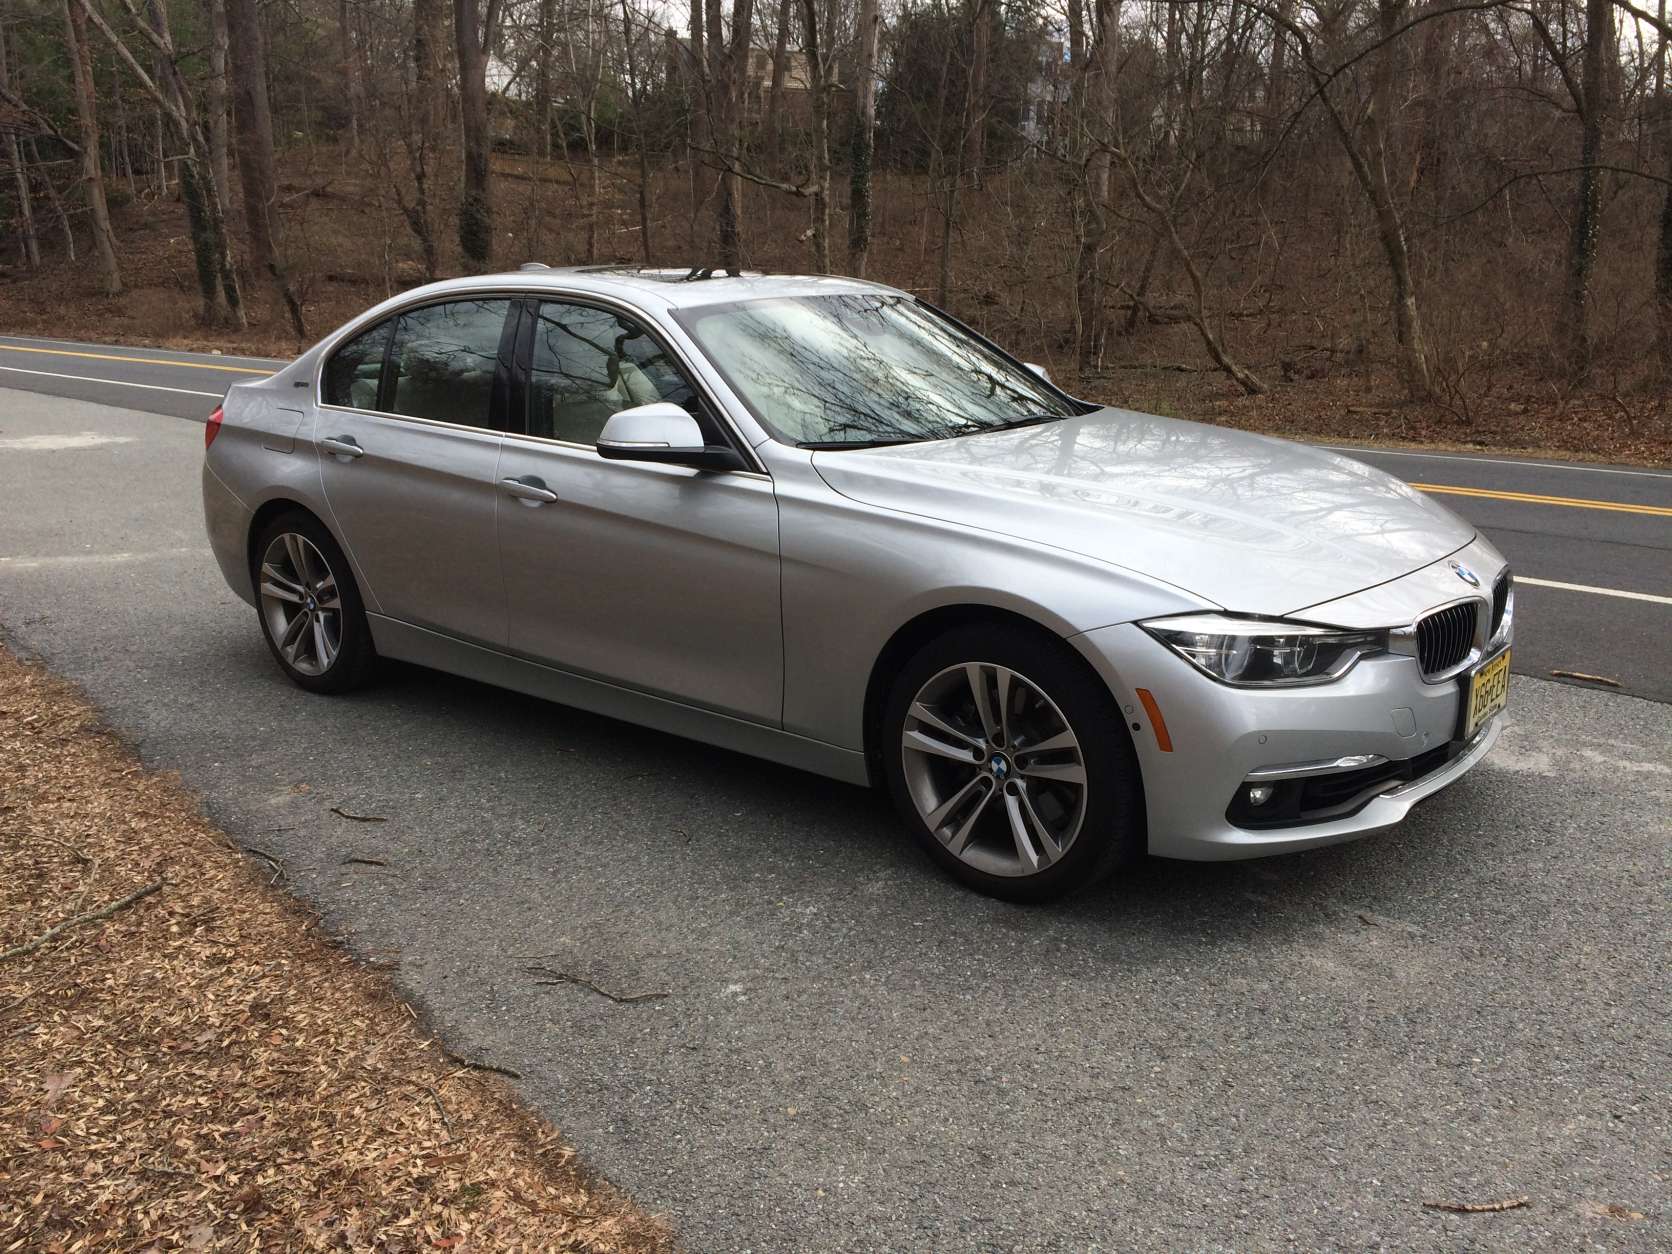 The 330e plug-in hybrid offers better gas mileage and the ability to run just electric power – luckily, without giving up what makes the 3 Series so special. (WTOP/Mike Parris)